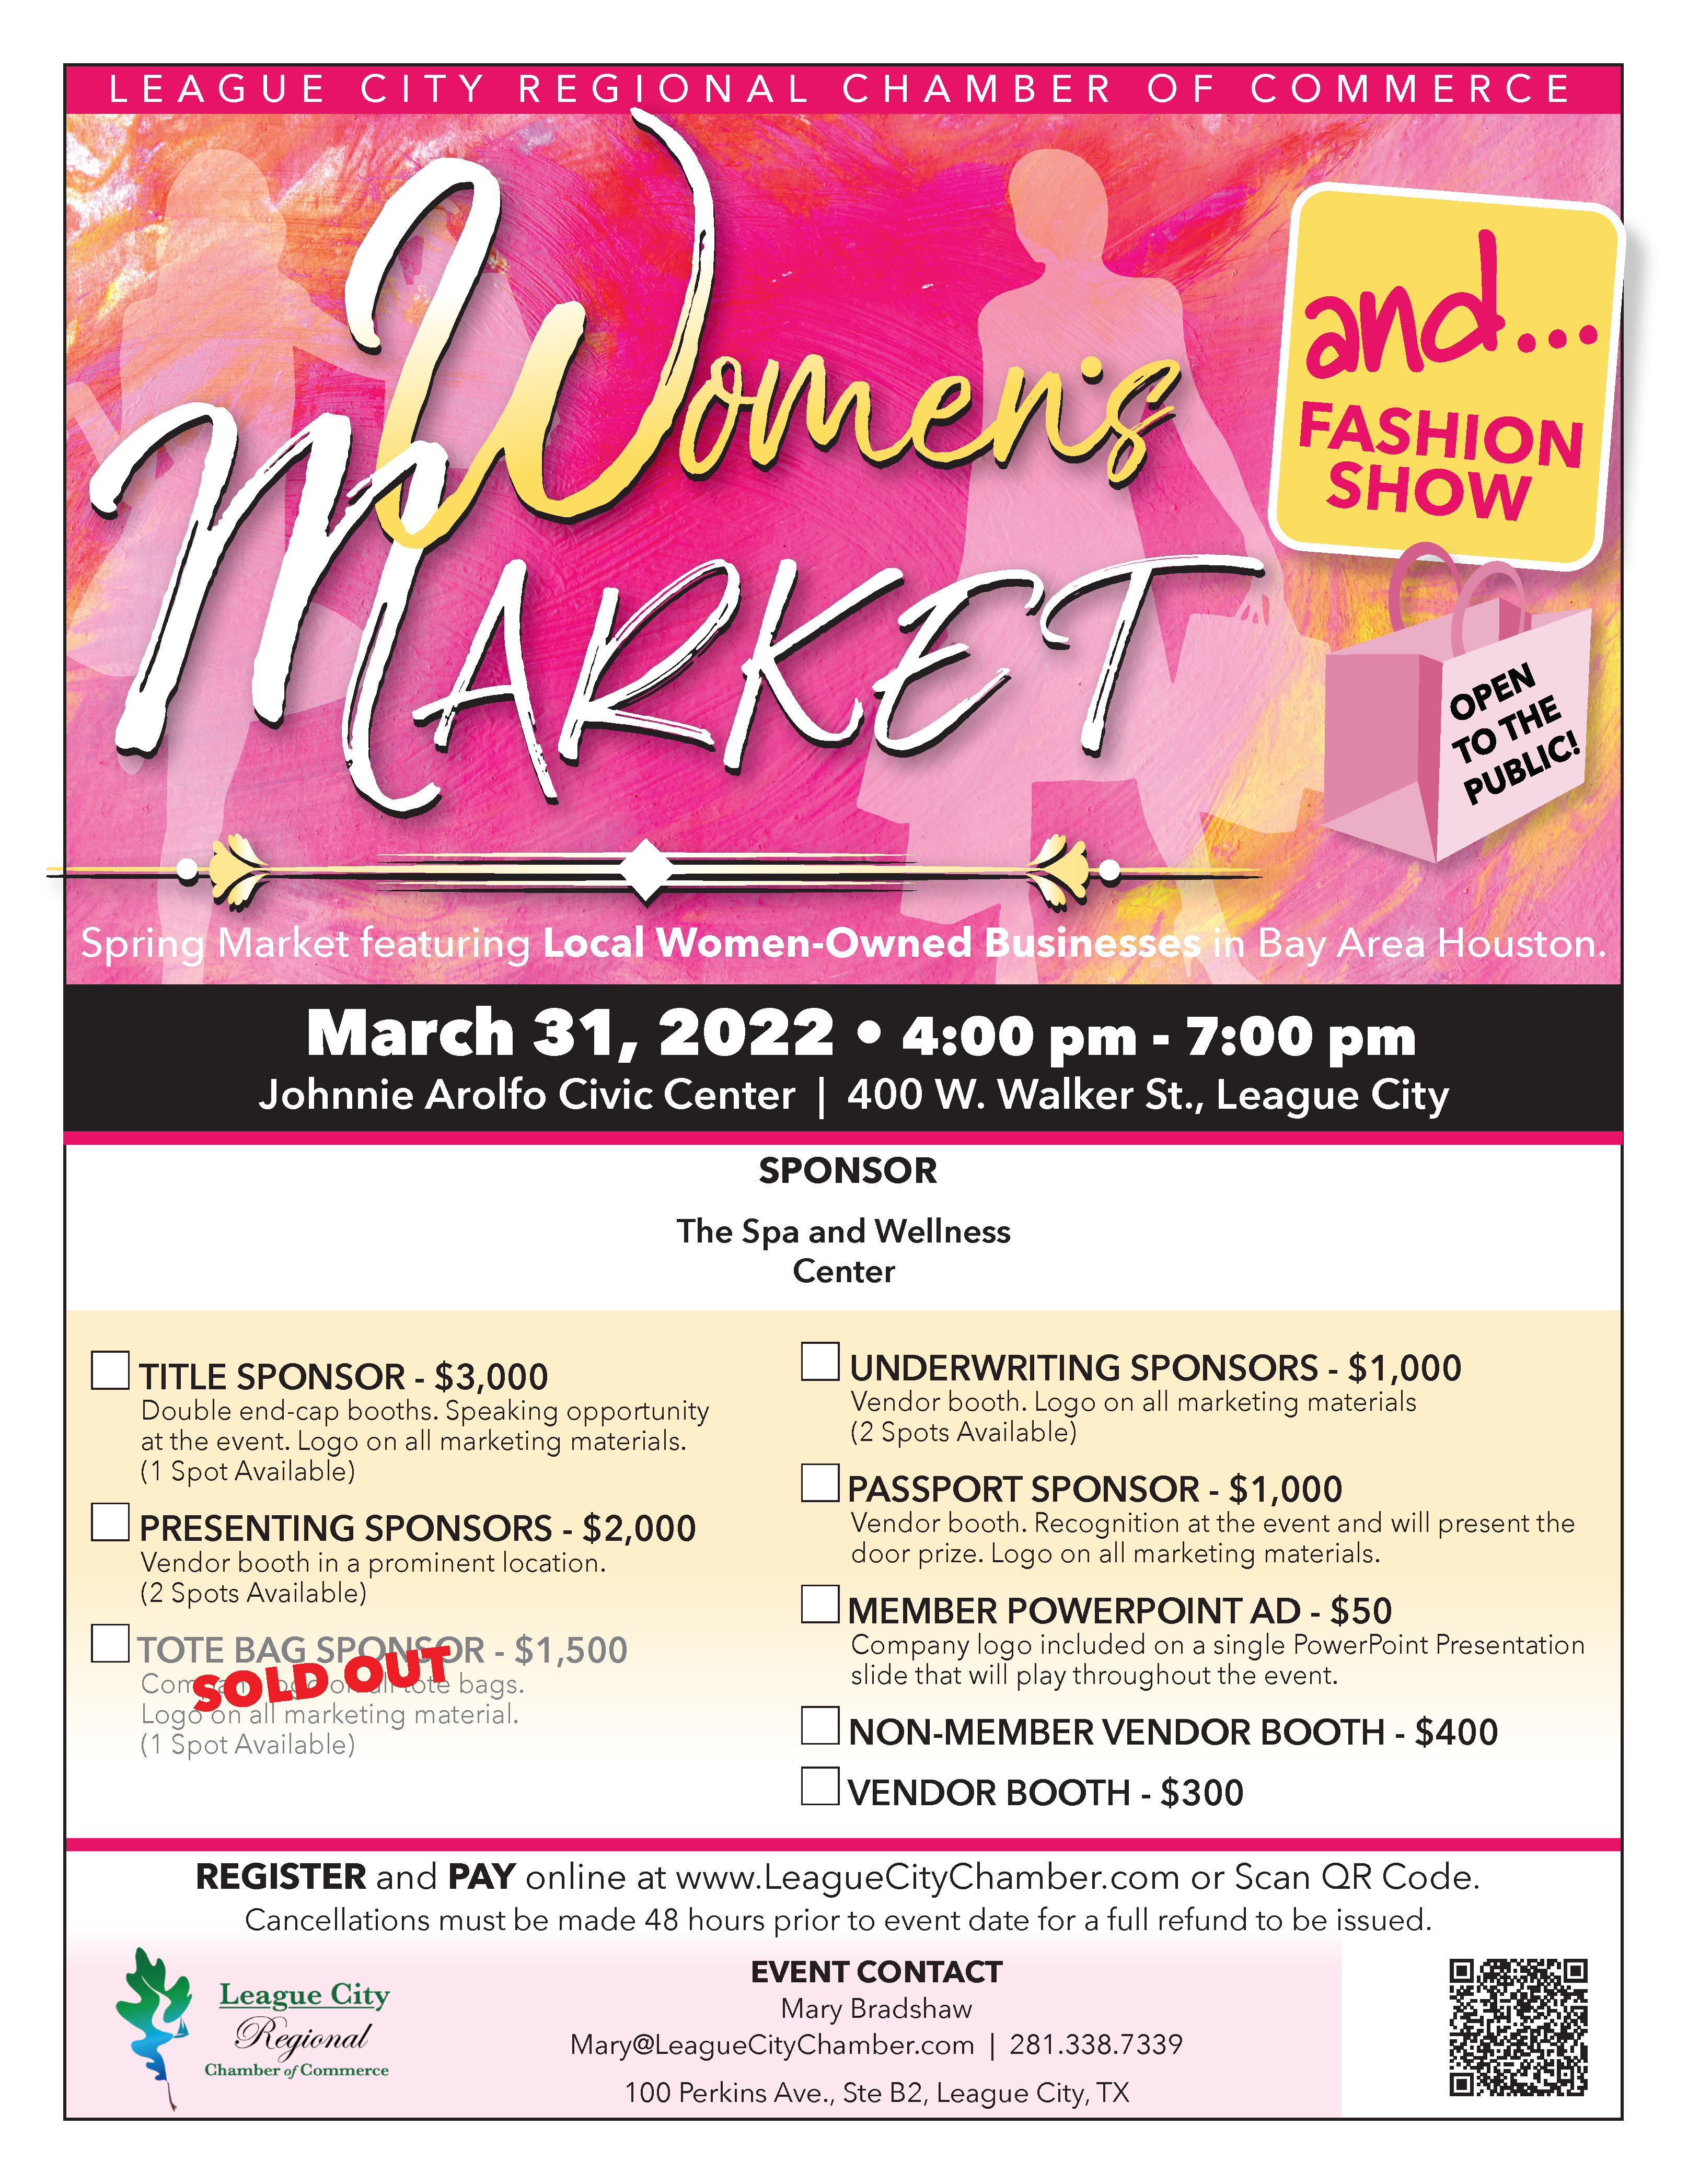 Come support women owned businesses at the Women’s Market!